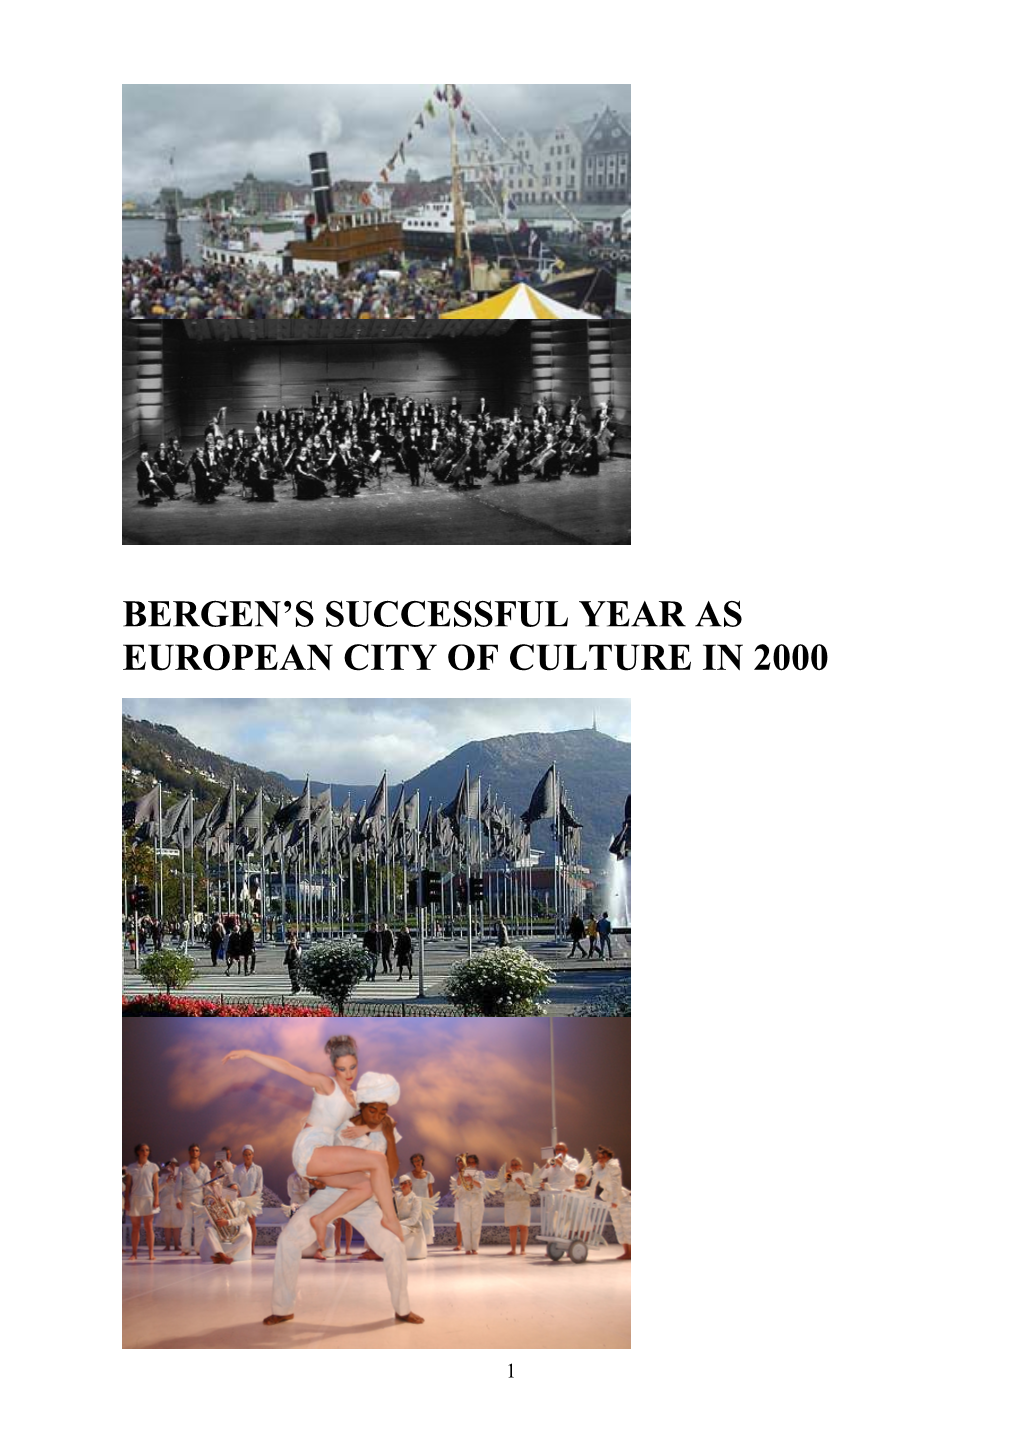 Bergen S Successful City of Culture in the Year 2000